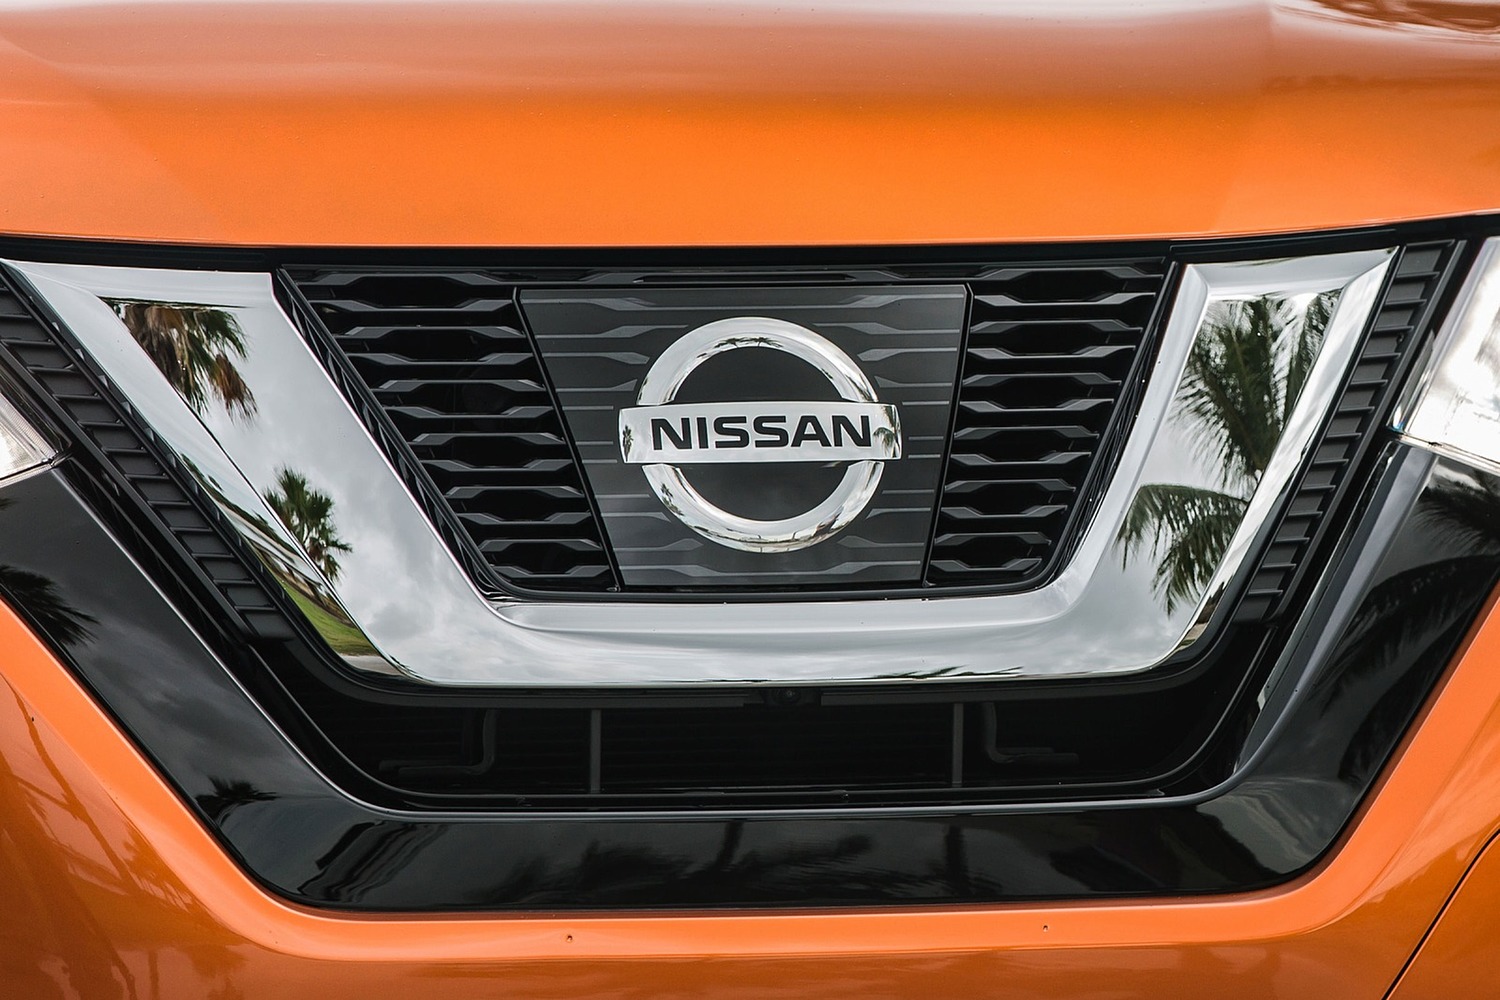 Nissan Rogue SL 4dr SUV Front Badge (2017 model year shown)